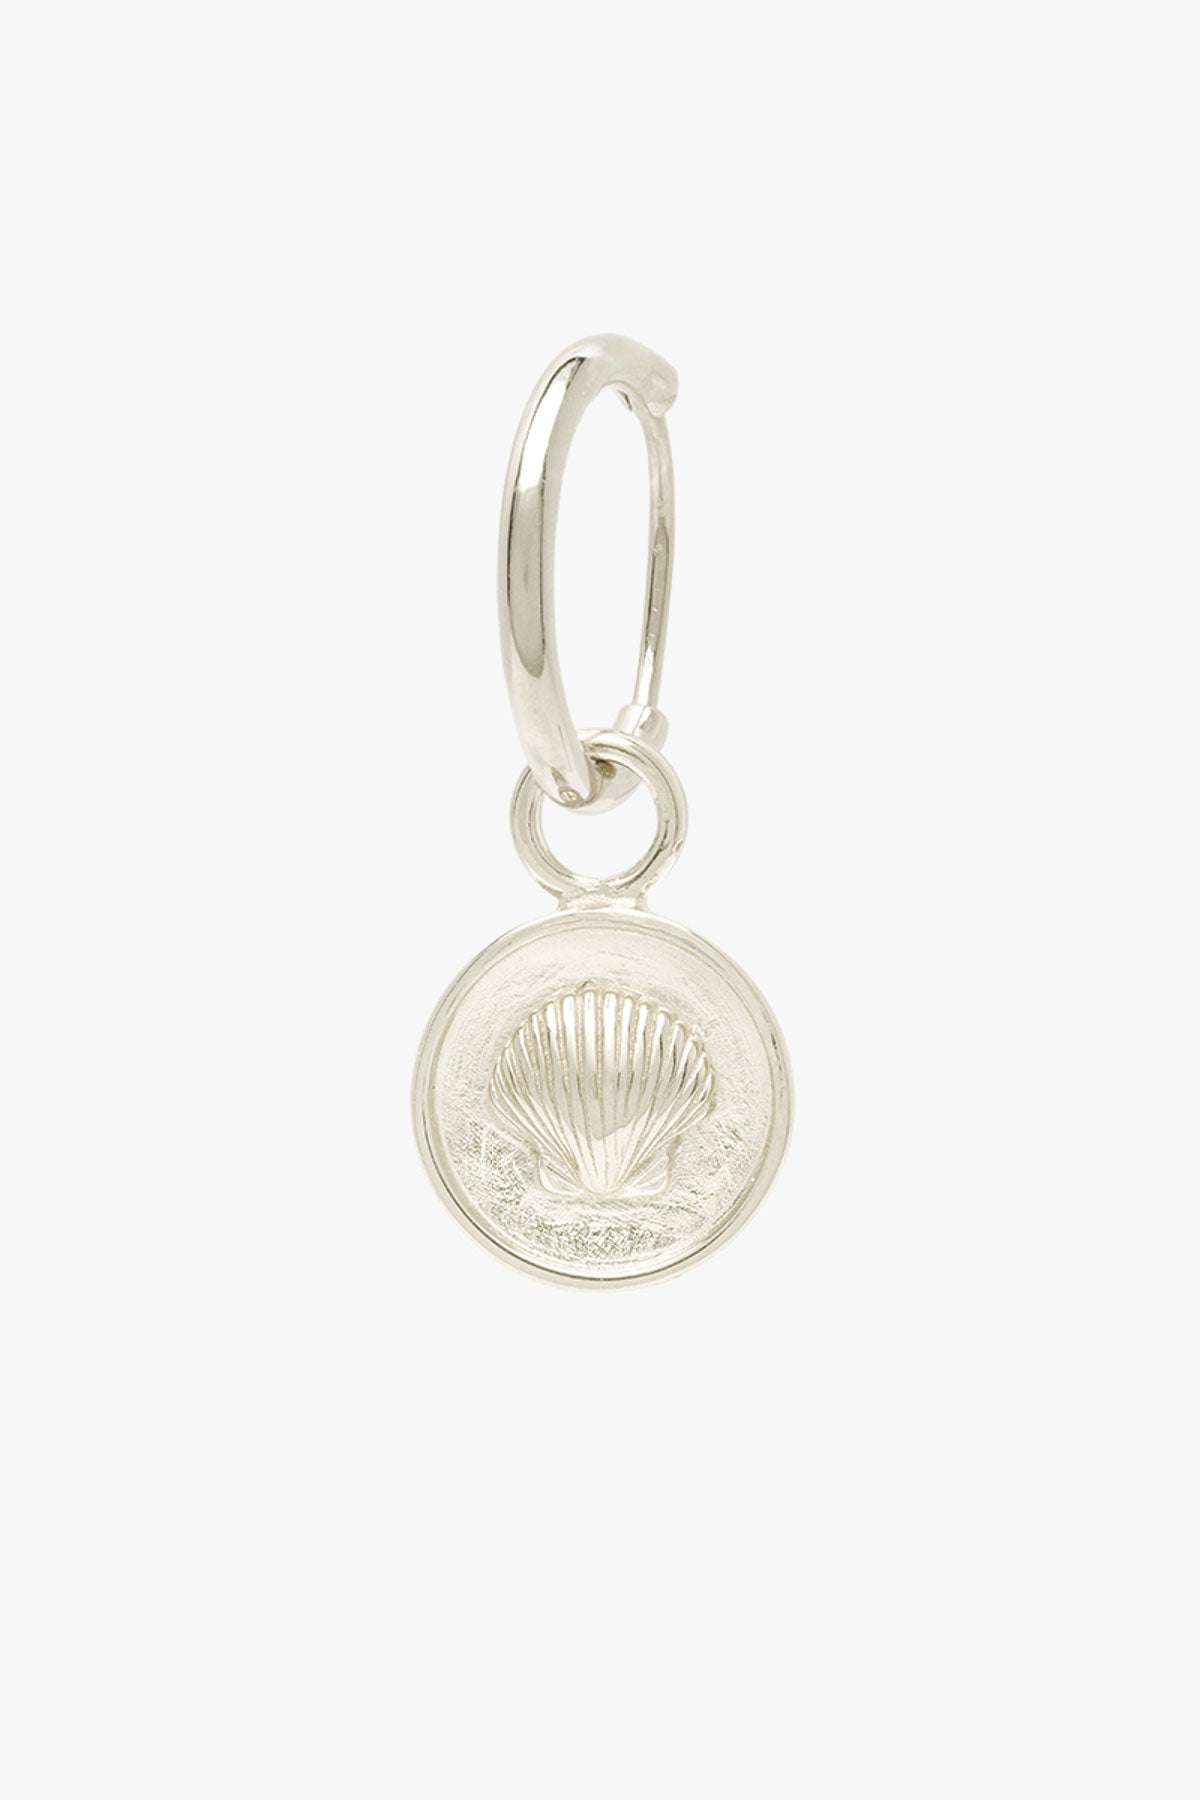 Ohrring Vintage shell coin Silber | wildthings